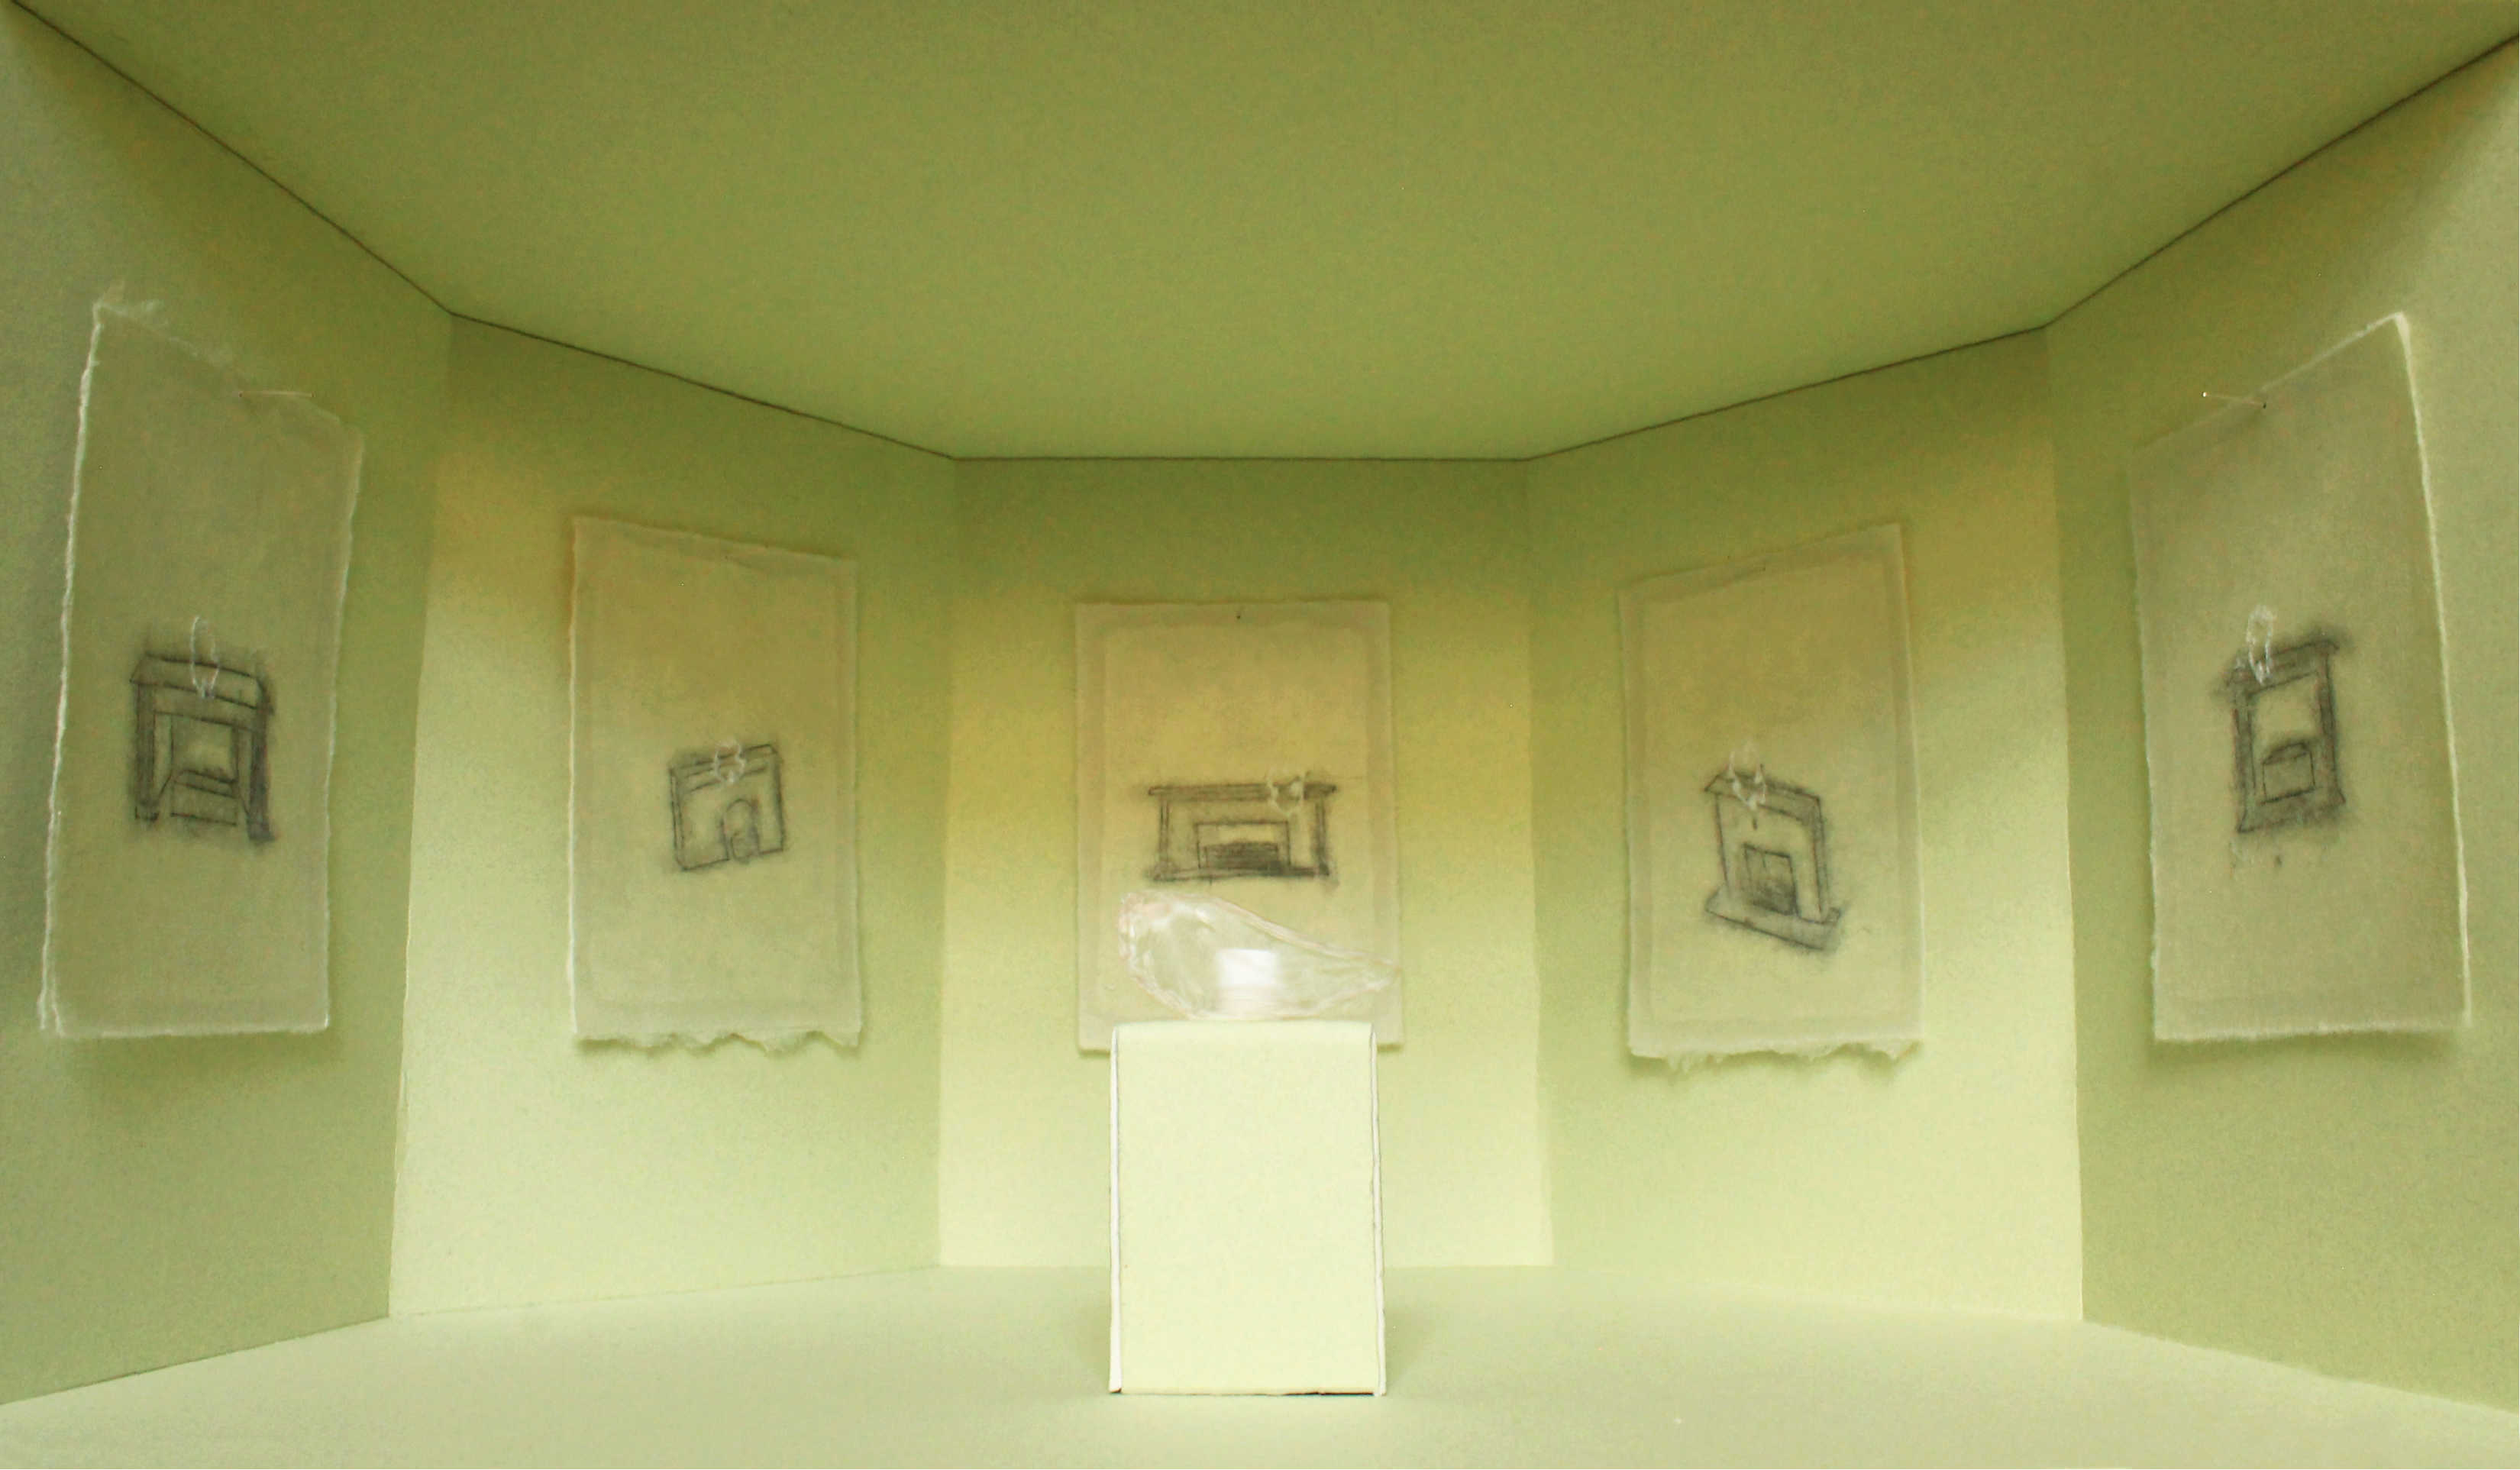 A transparent onion skin is sat on a green plinth, surrounded by drawings on green washi paper installed in a green room. 